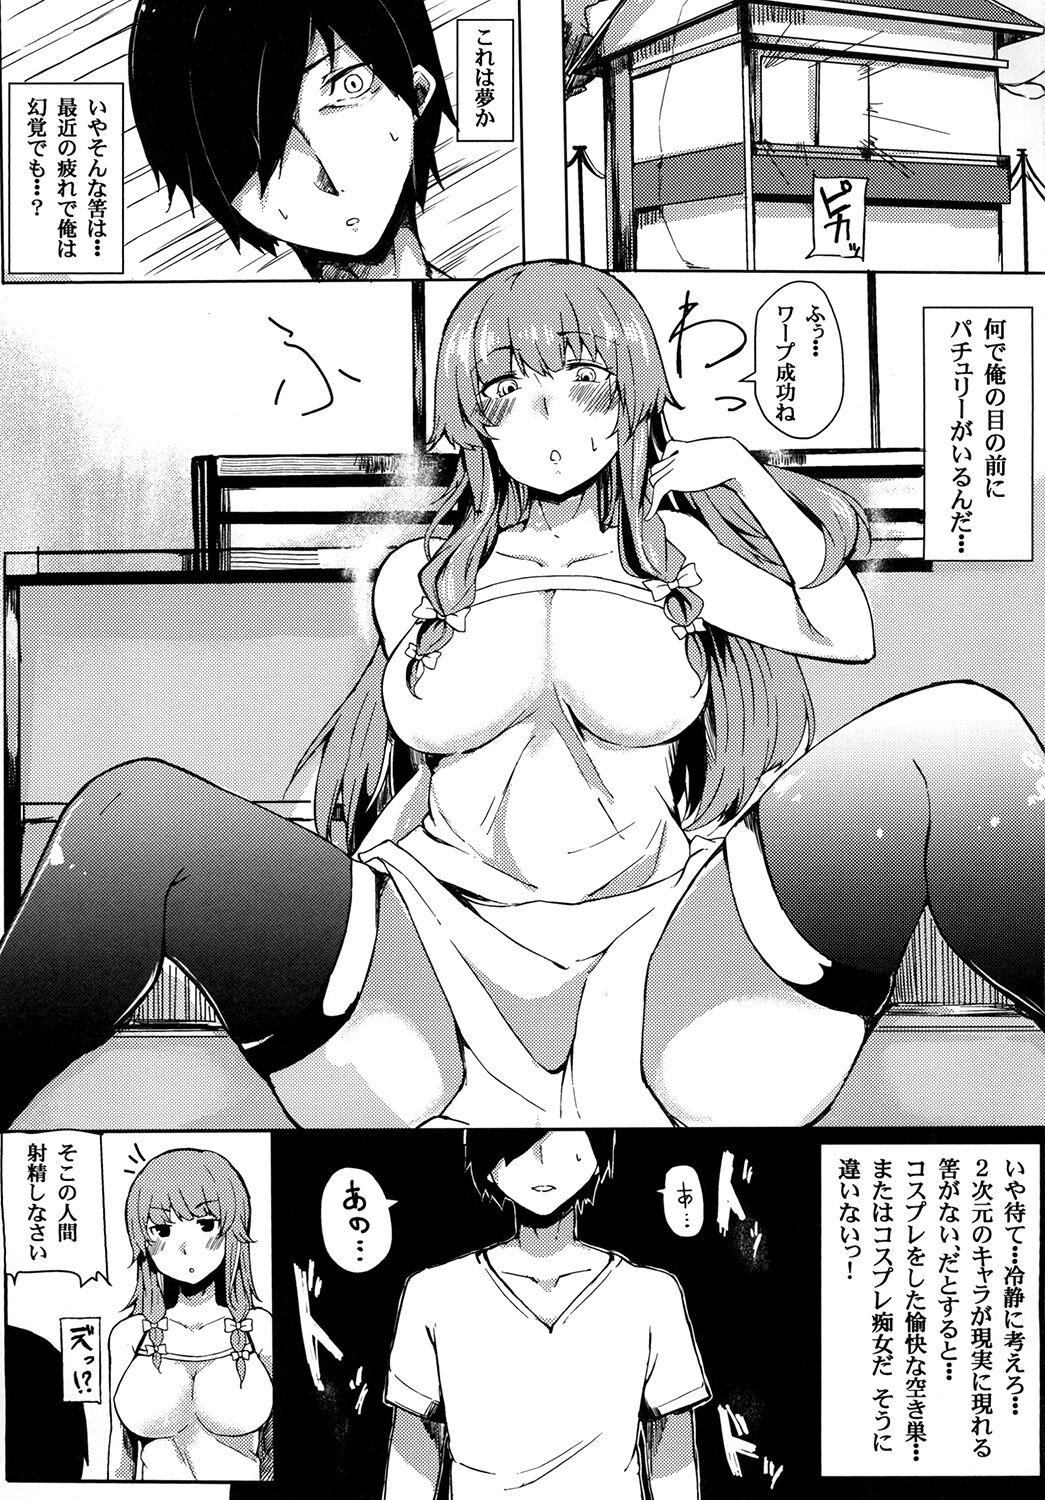 Dicks knowledge No life. - Touhou project Transsexual - Picture 3